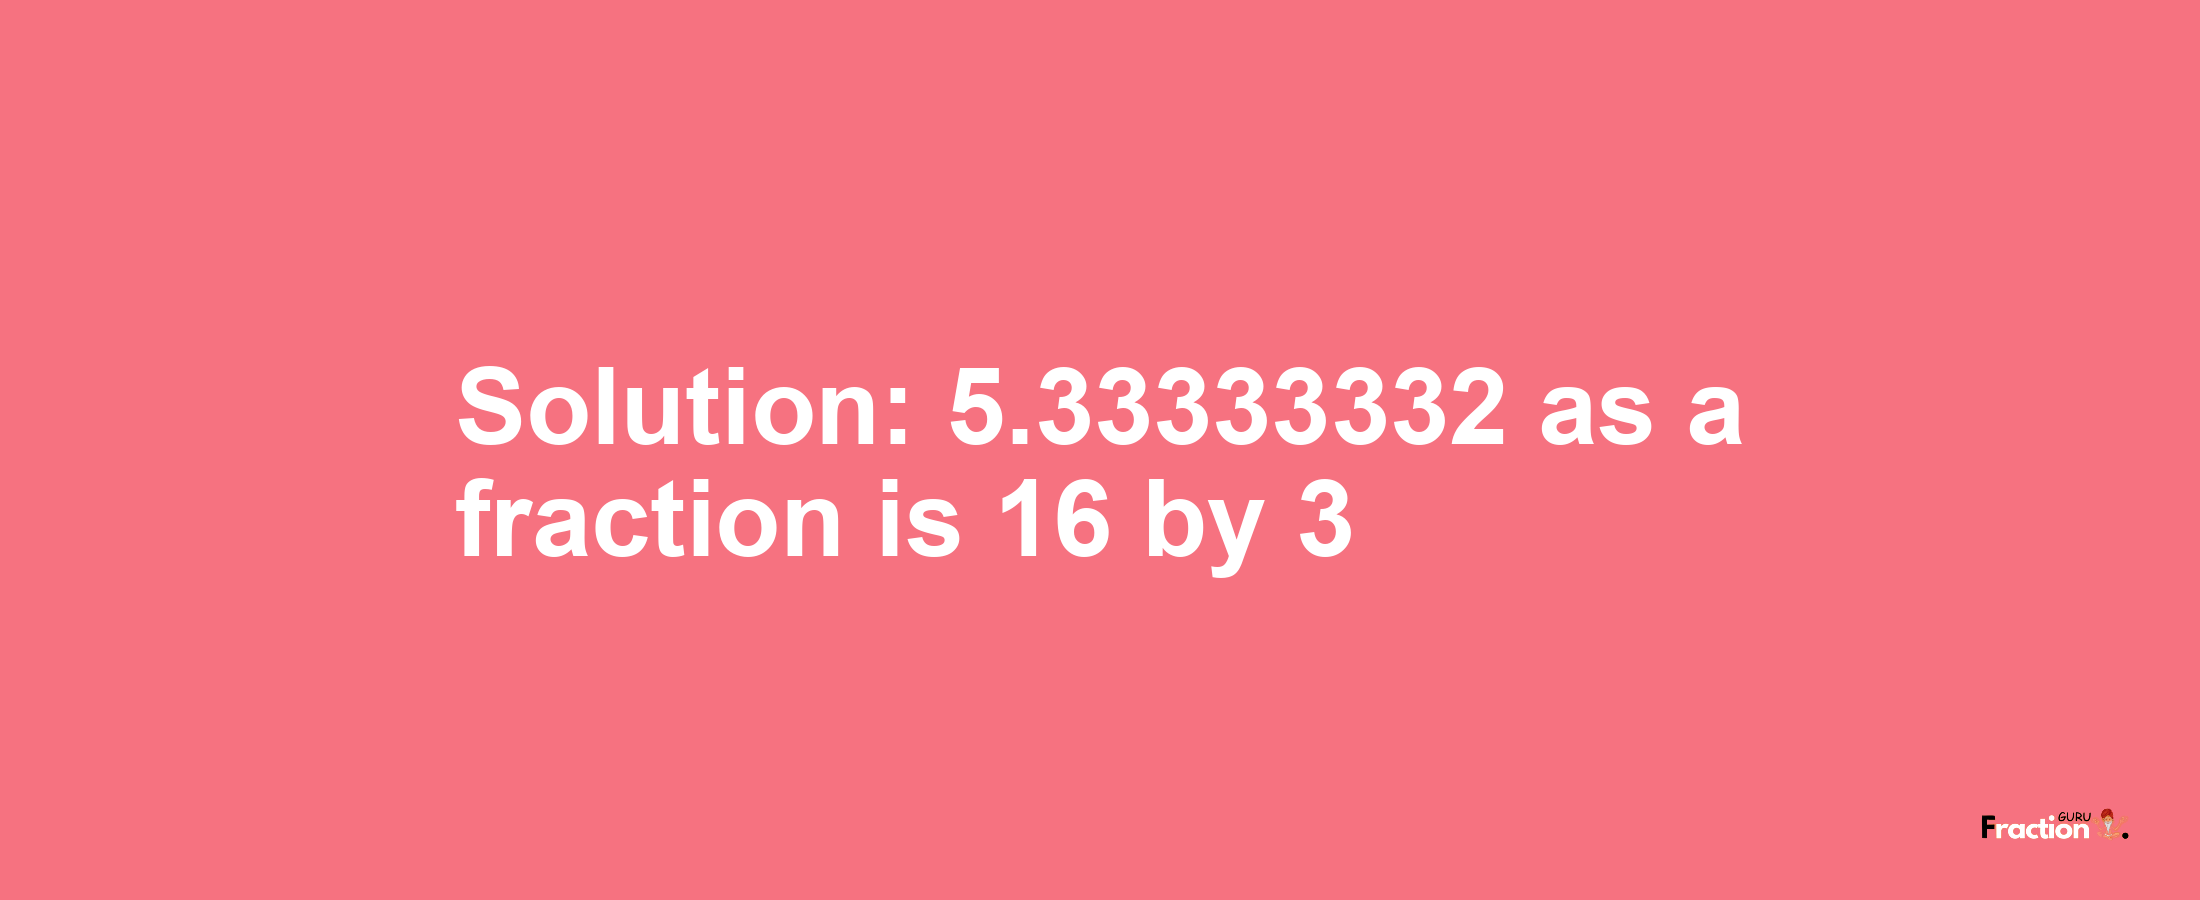 Solution:5.33333332 as a fraction is 16/3